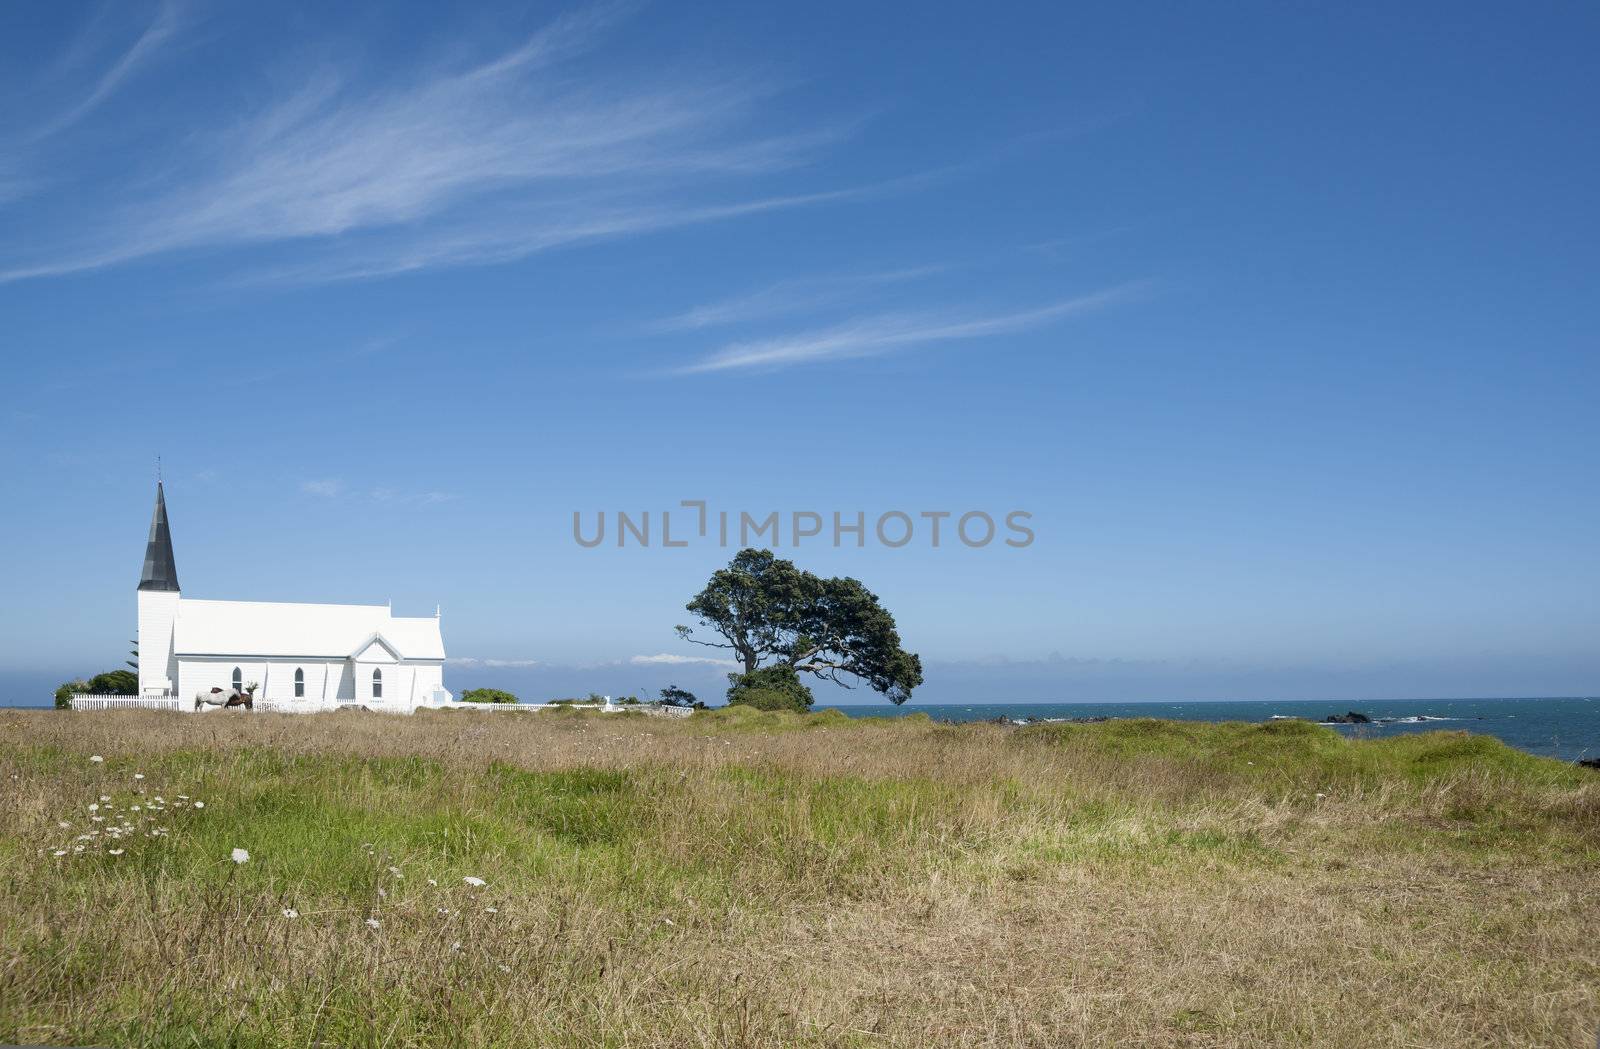 Traditional white church with horses outside in remote location.







Traditional white church with horses outside.